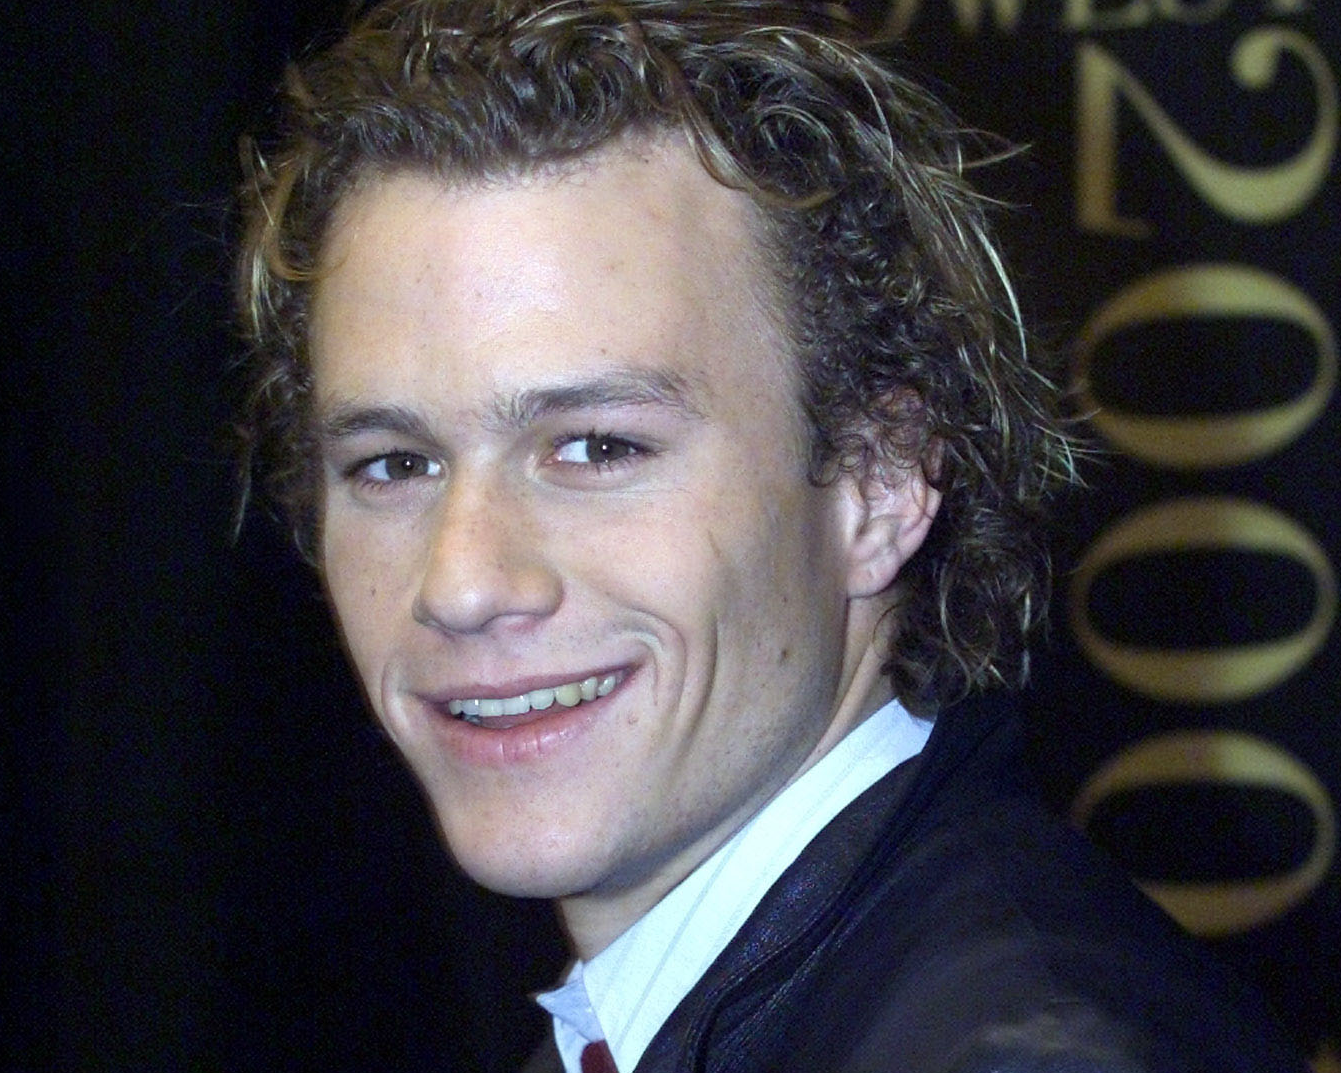 Busy Philipps cries while remembering Heath Ledger in emotional video